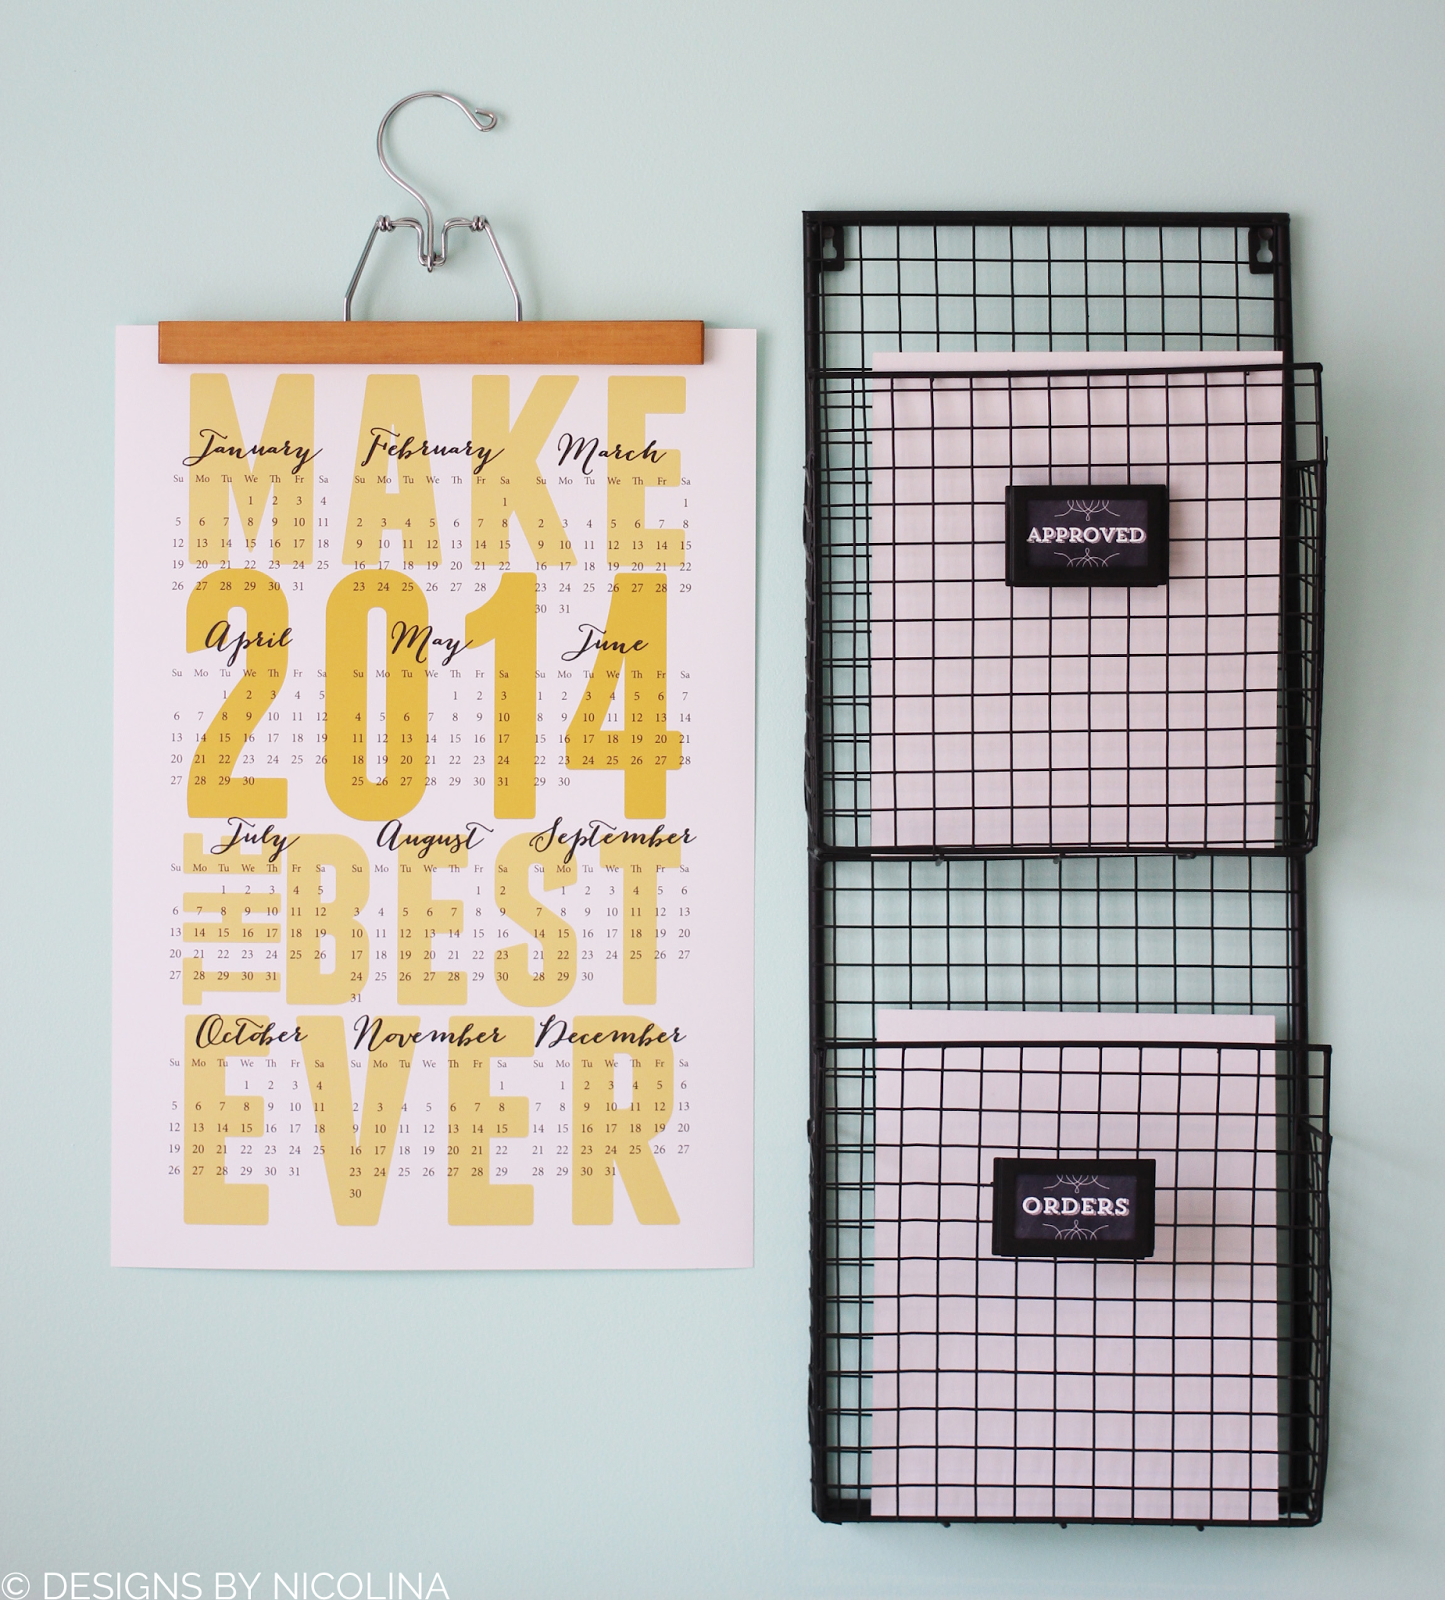 designs by nicolina: MAKE 2014 THE BEST EVER